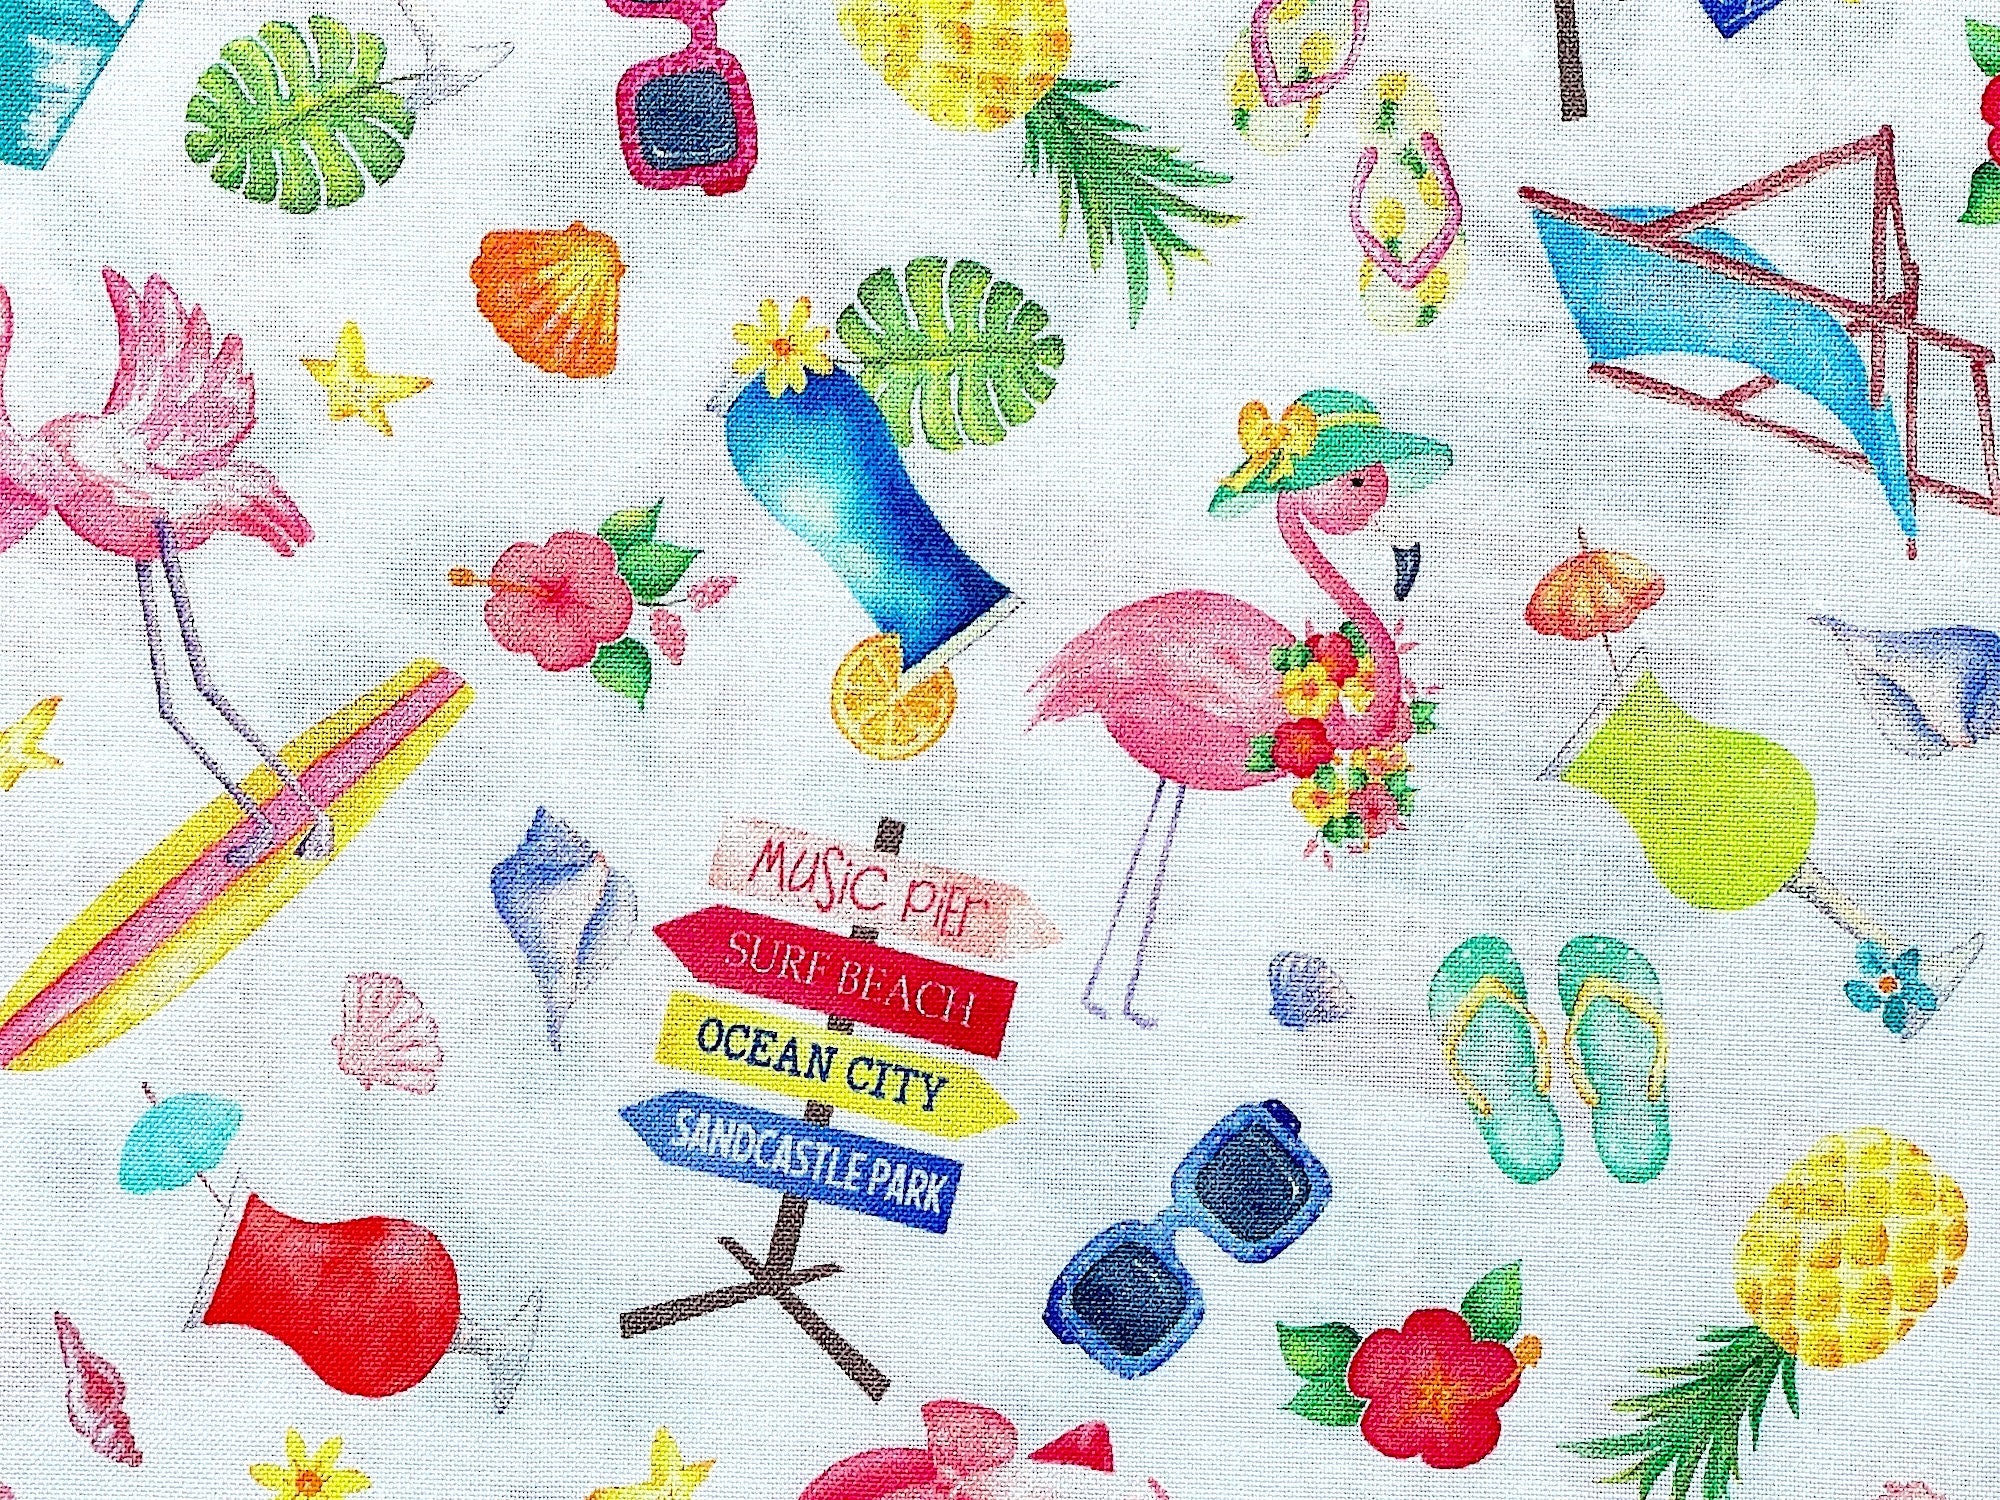 This fabric is part of the Fun In The sun collection. This white cotton fabric is covered with sunglasses, pineapples, pink flamingos, beach chairs, sand pail and shovels, beach signs and beverages